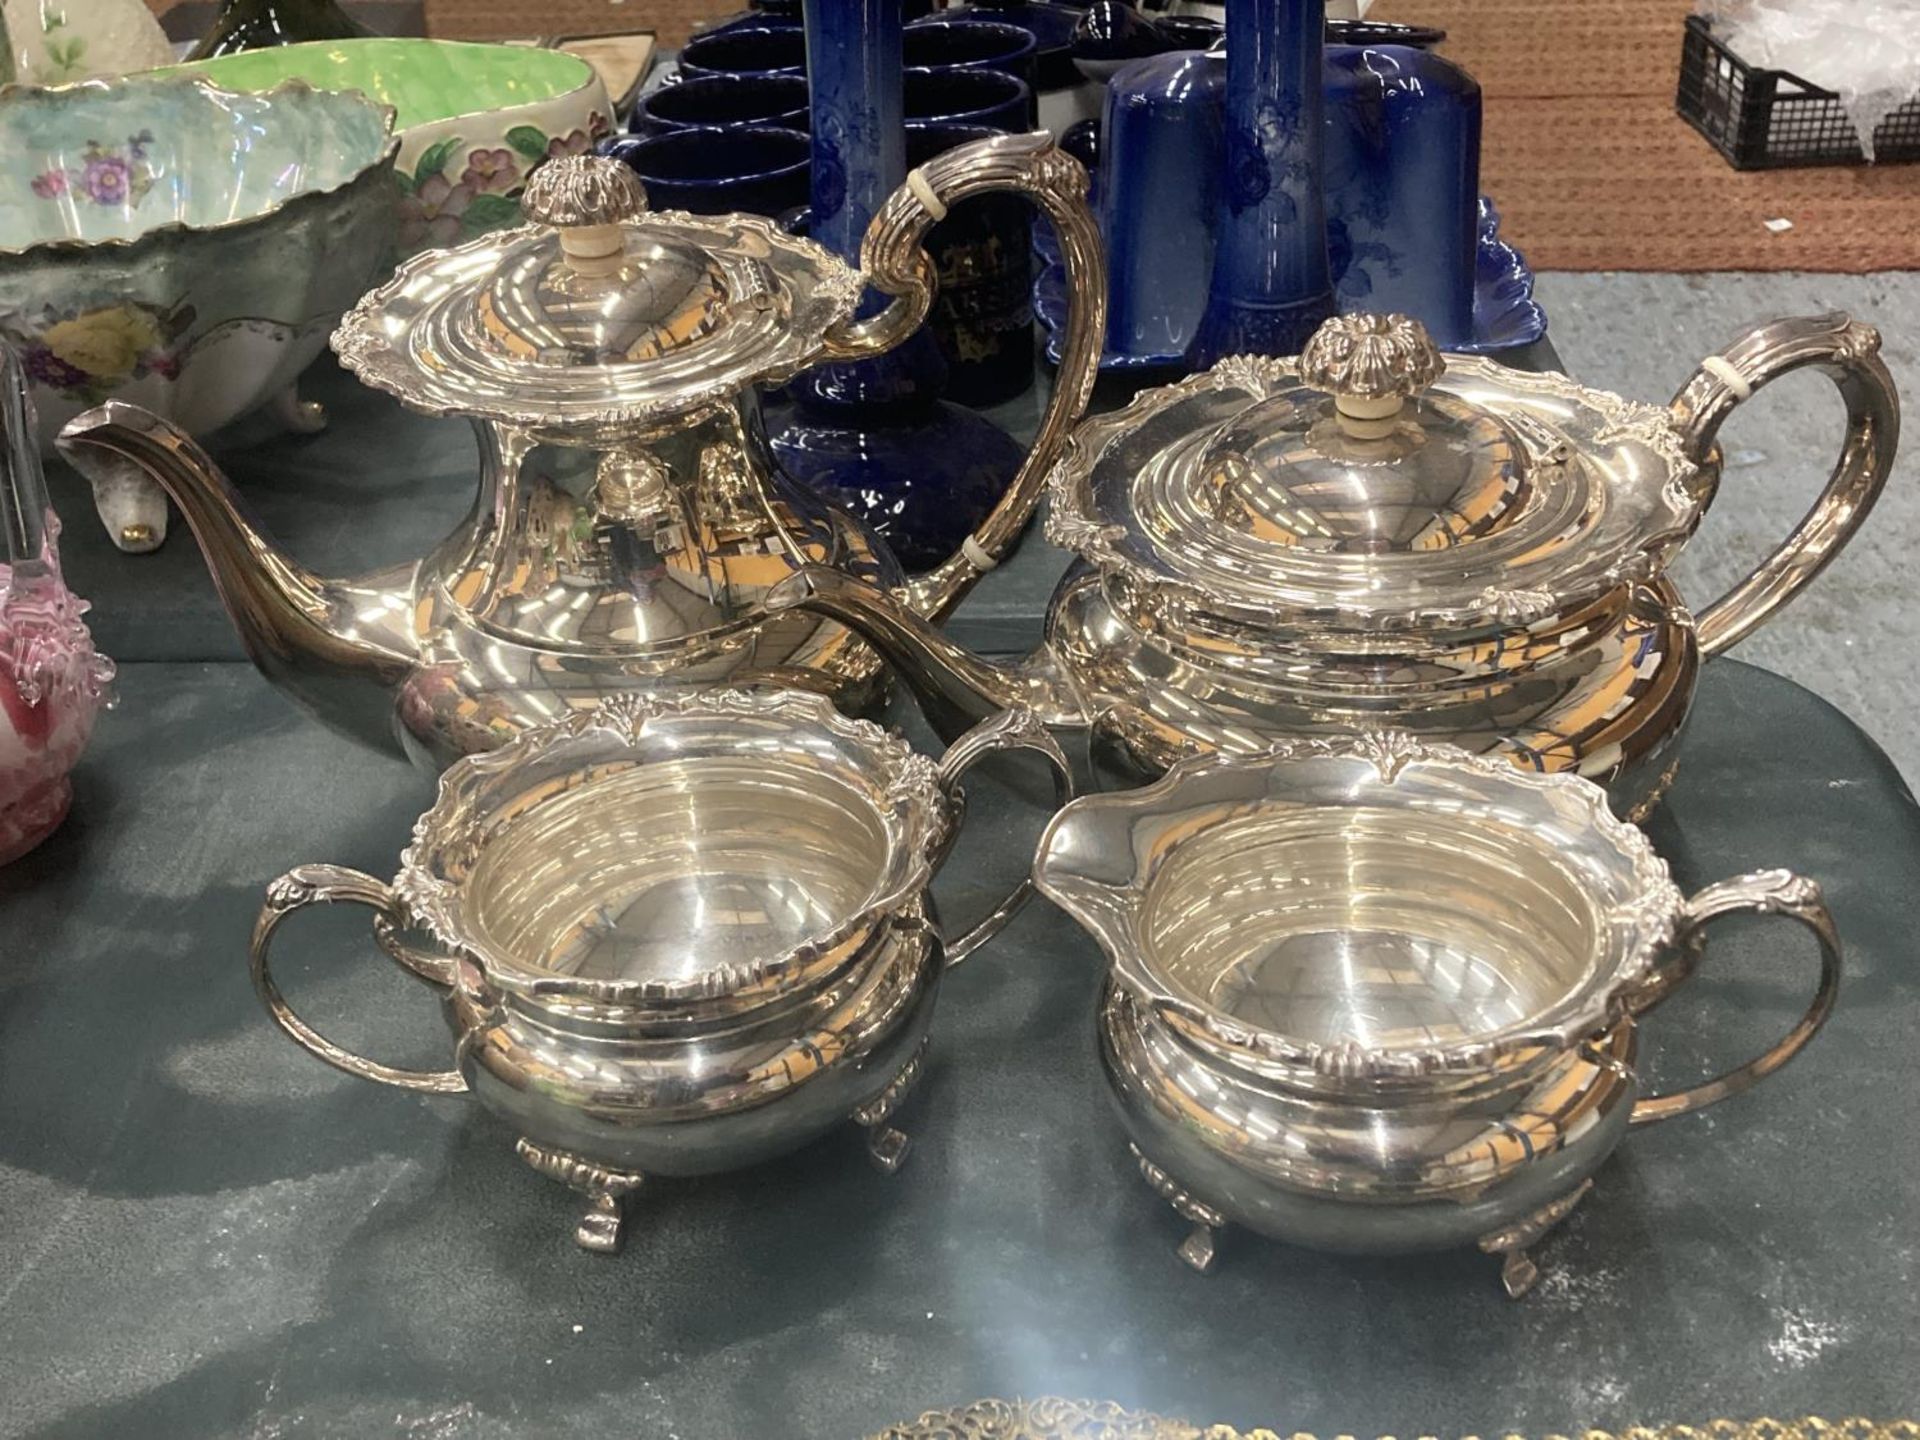 A VINTAGE SILVER PLATED TEASET TO INCLUDE A TEAPOT, COFFEE POT, SUGAR BOWL AND CREAM JUG